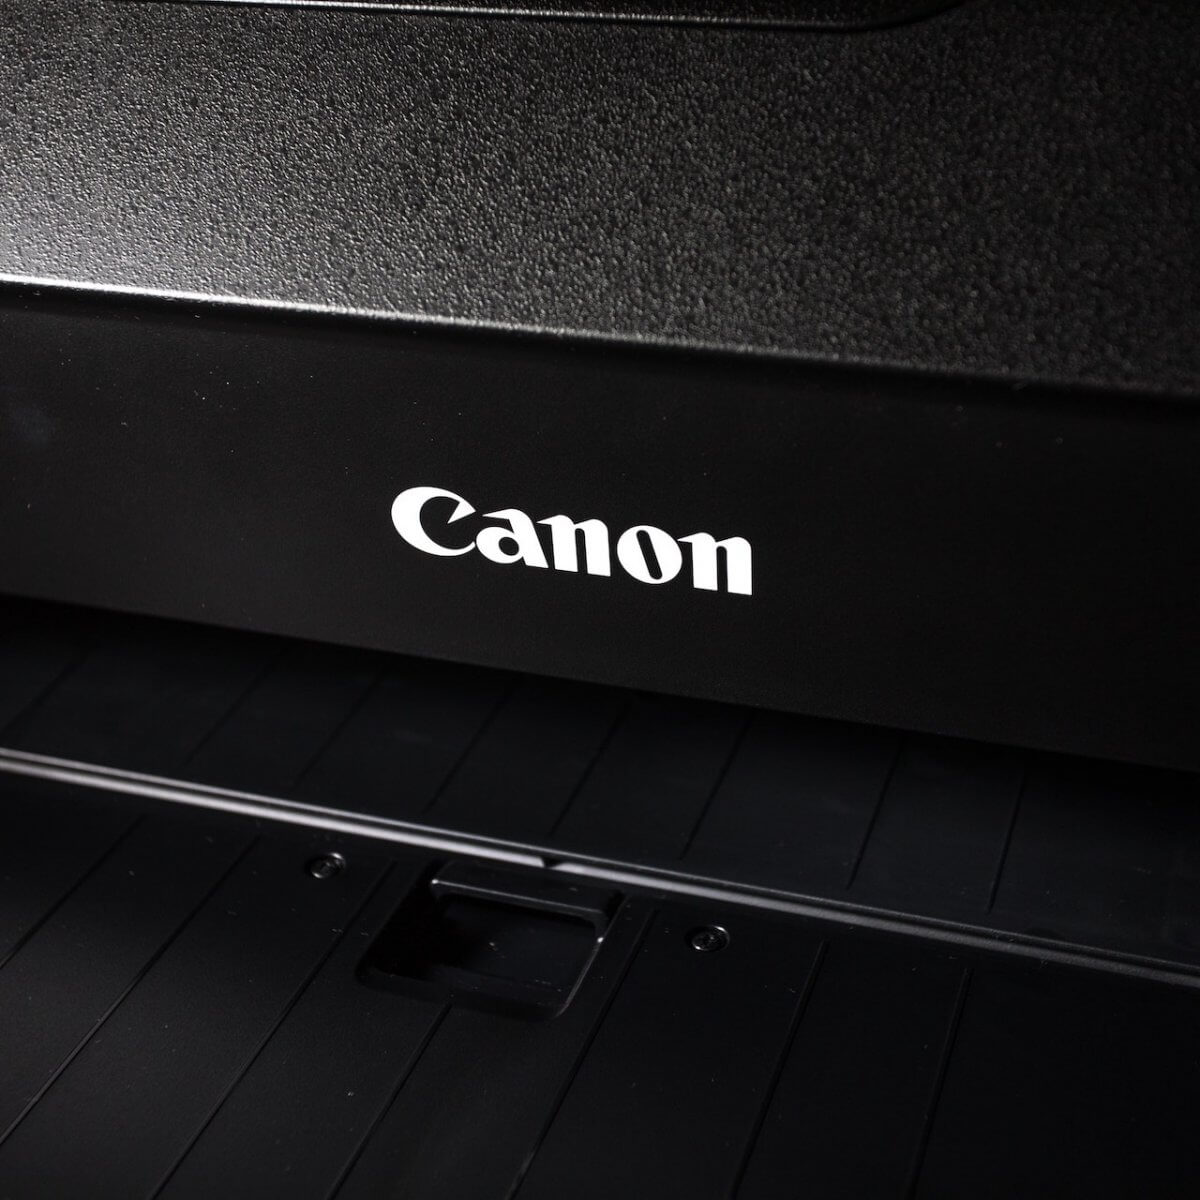 canon mf scan utility for windows 10